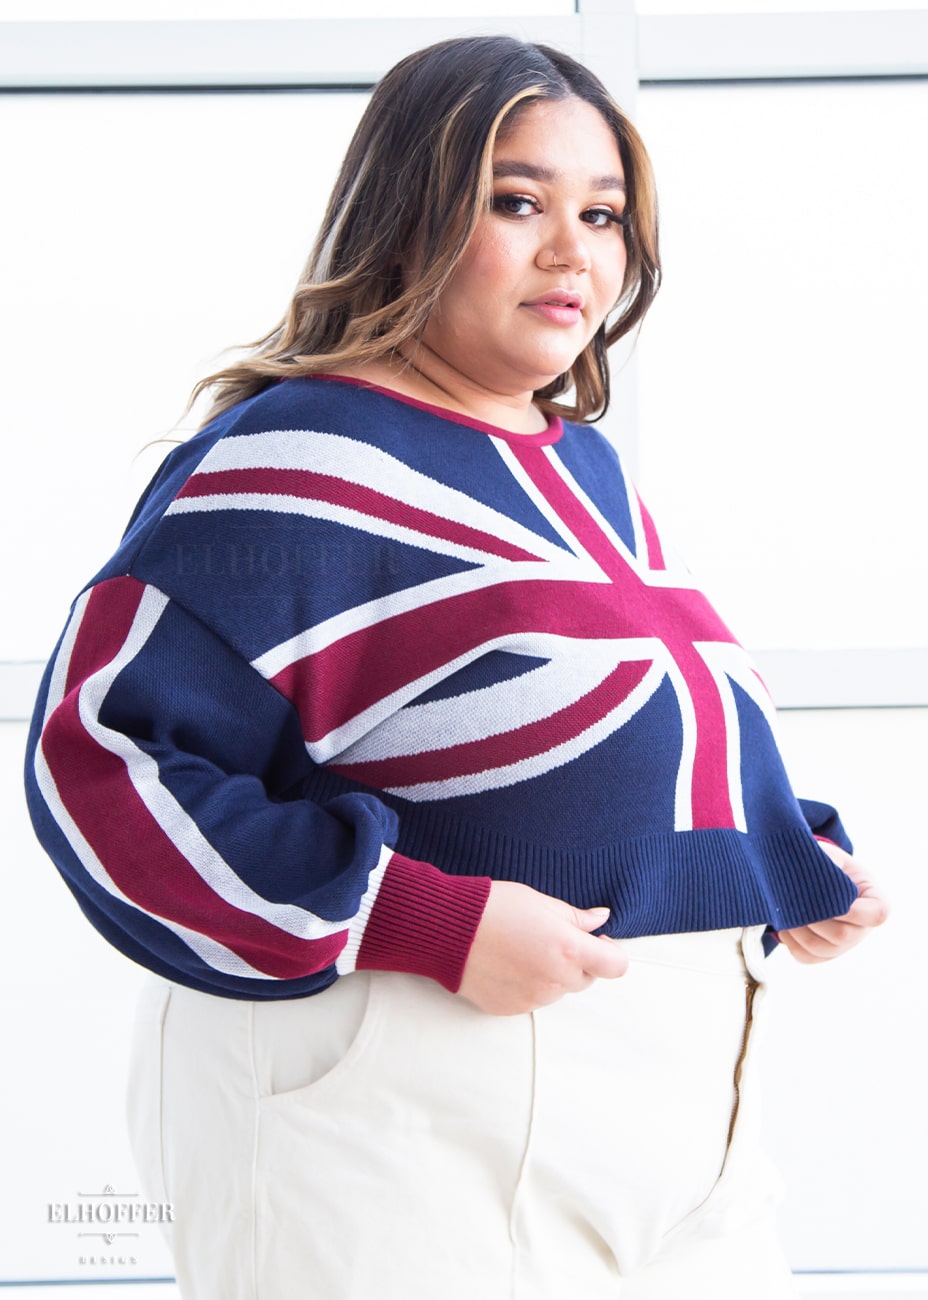 Cori, a sun kissed skinned 2xl model with long balayage hair, is smiling while wearing a cropped oversize sweater with a Union Jack design and long billowing sleeves.